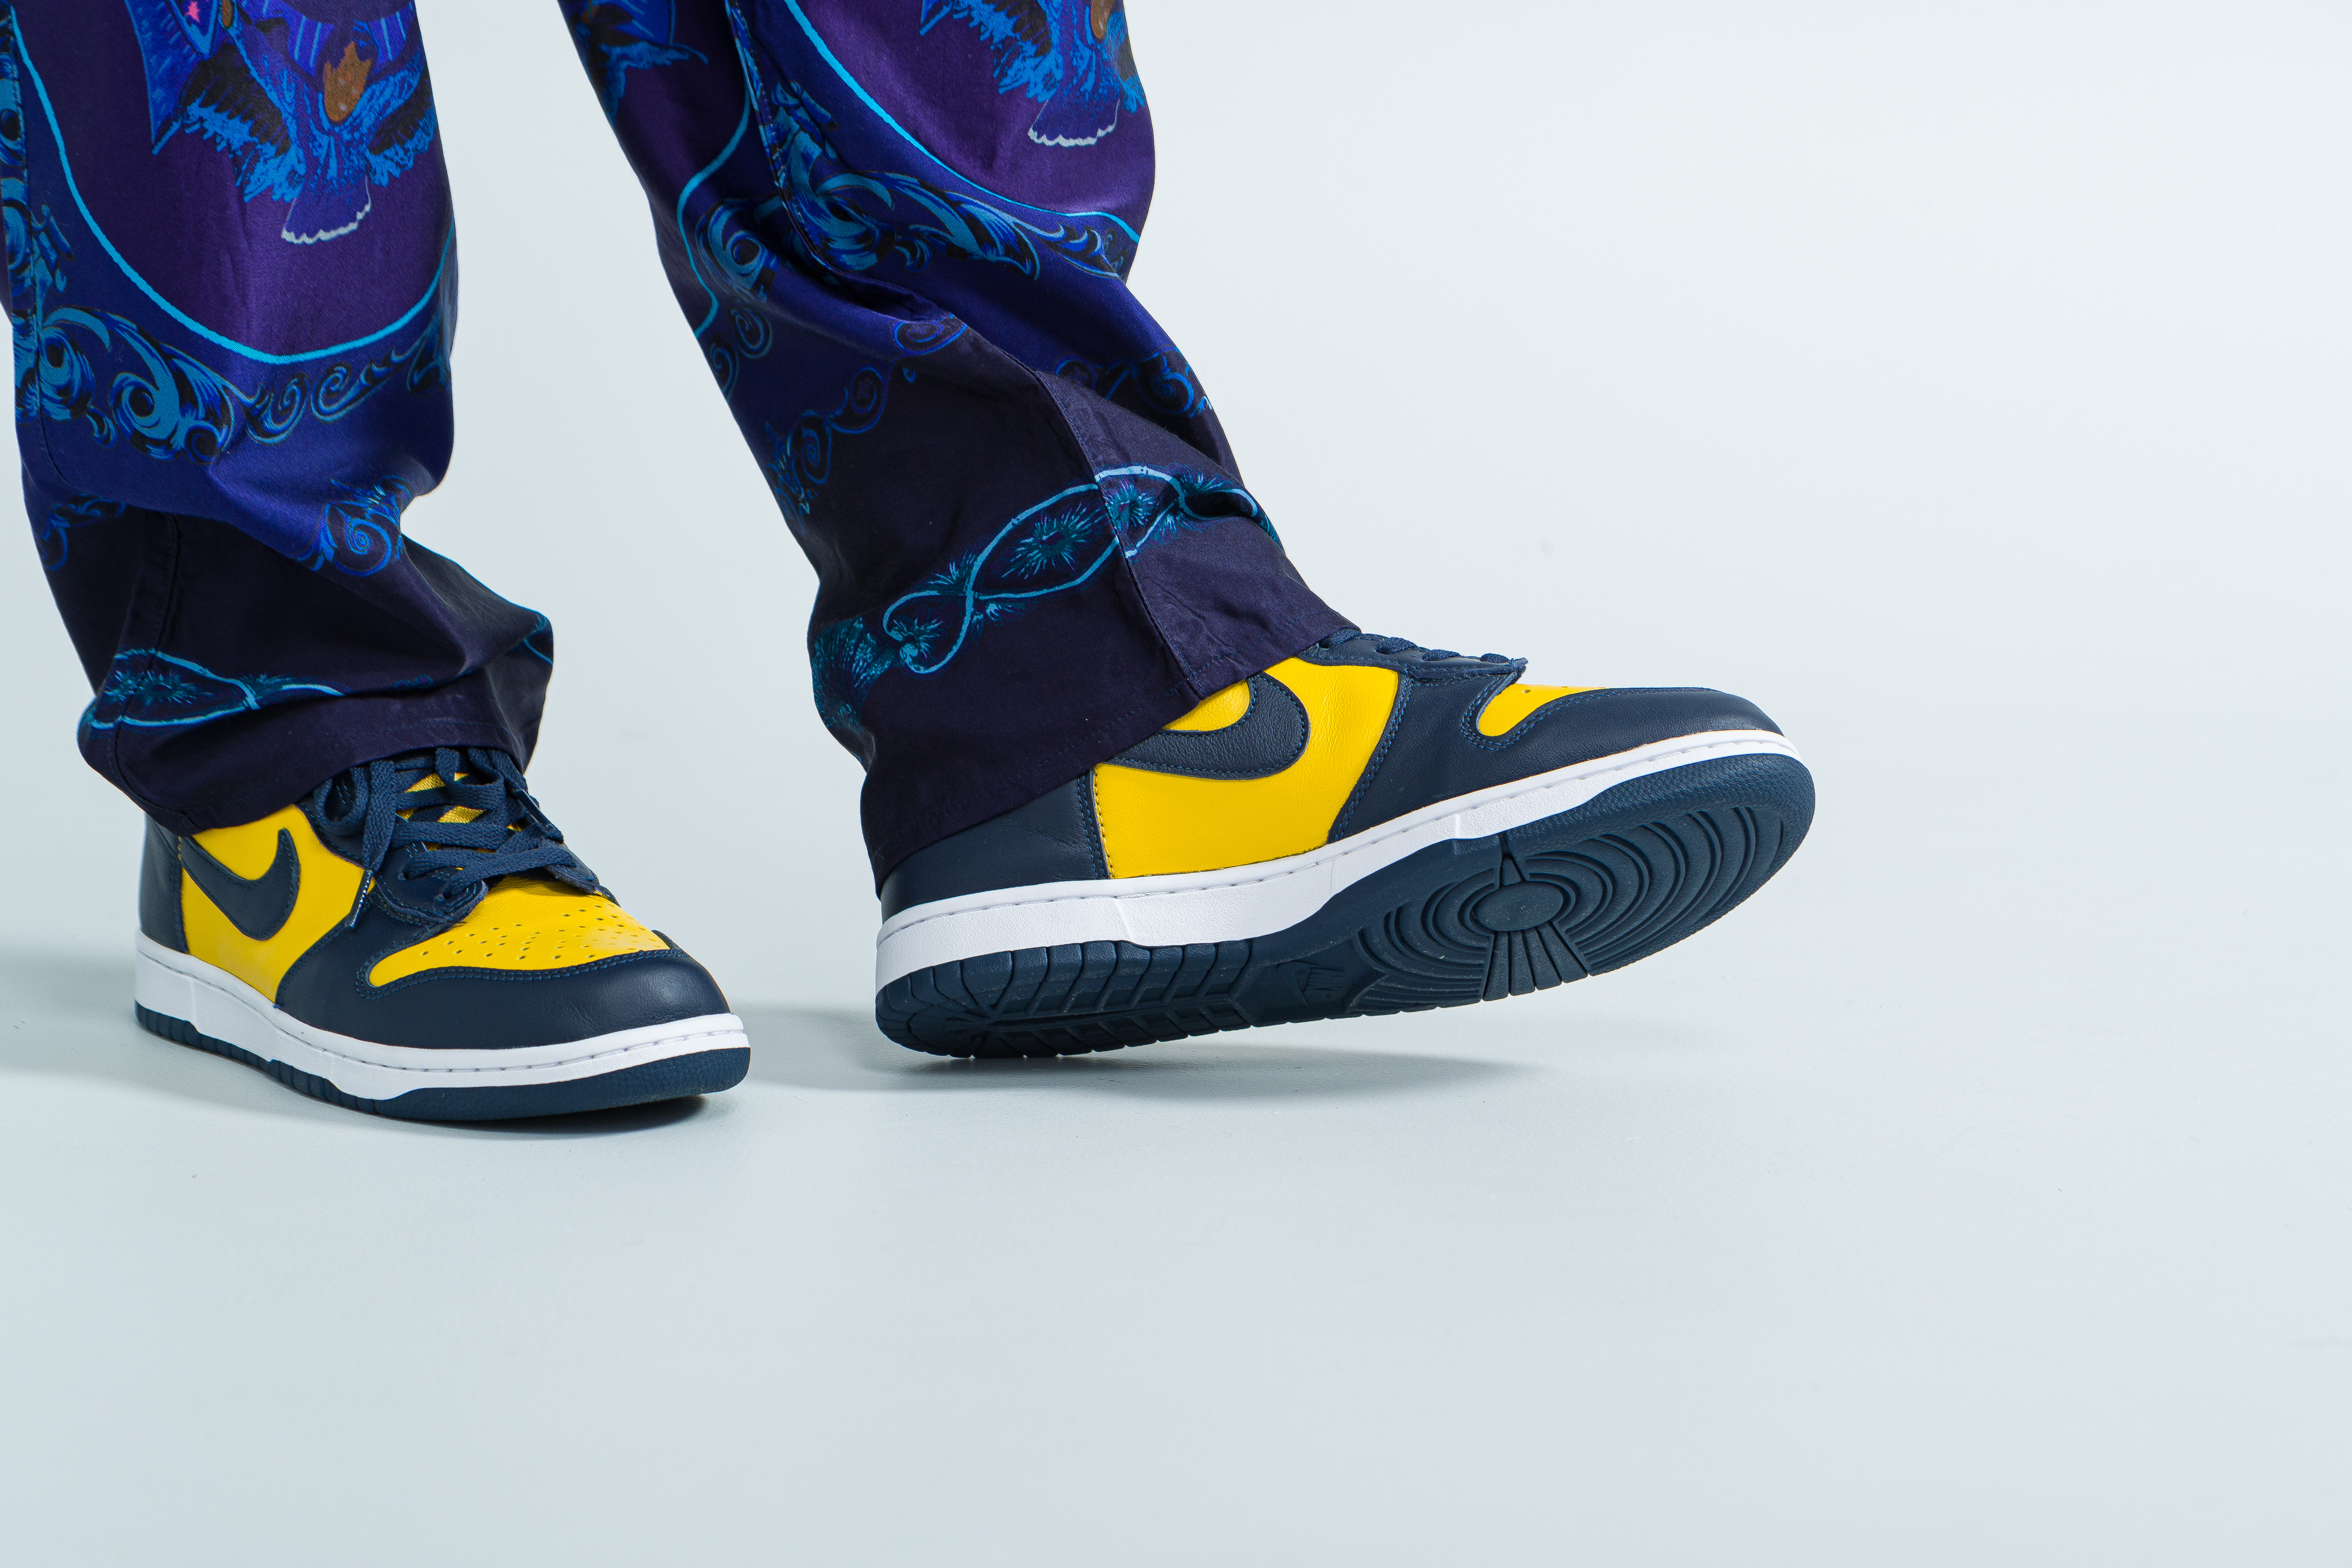 Up There Launches - Nike Dunk High SP - Varsity Maize/Midnight Navy 'Michigan'